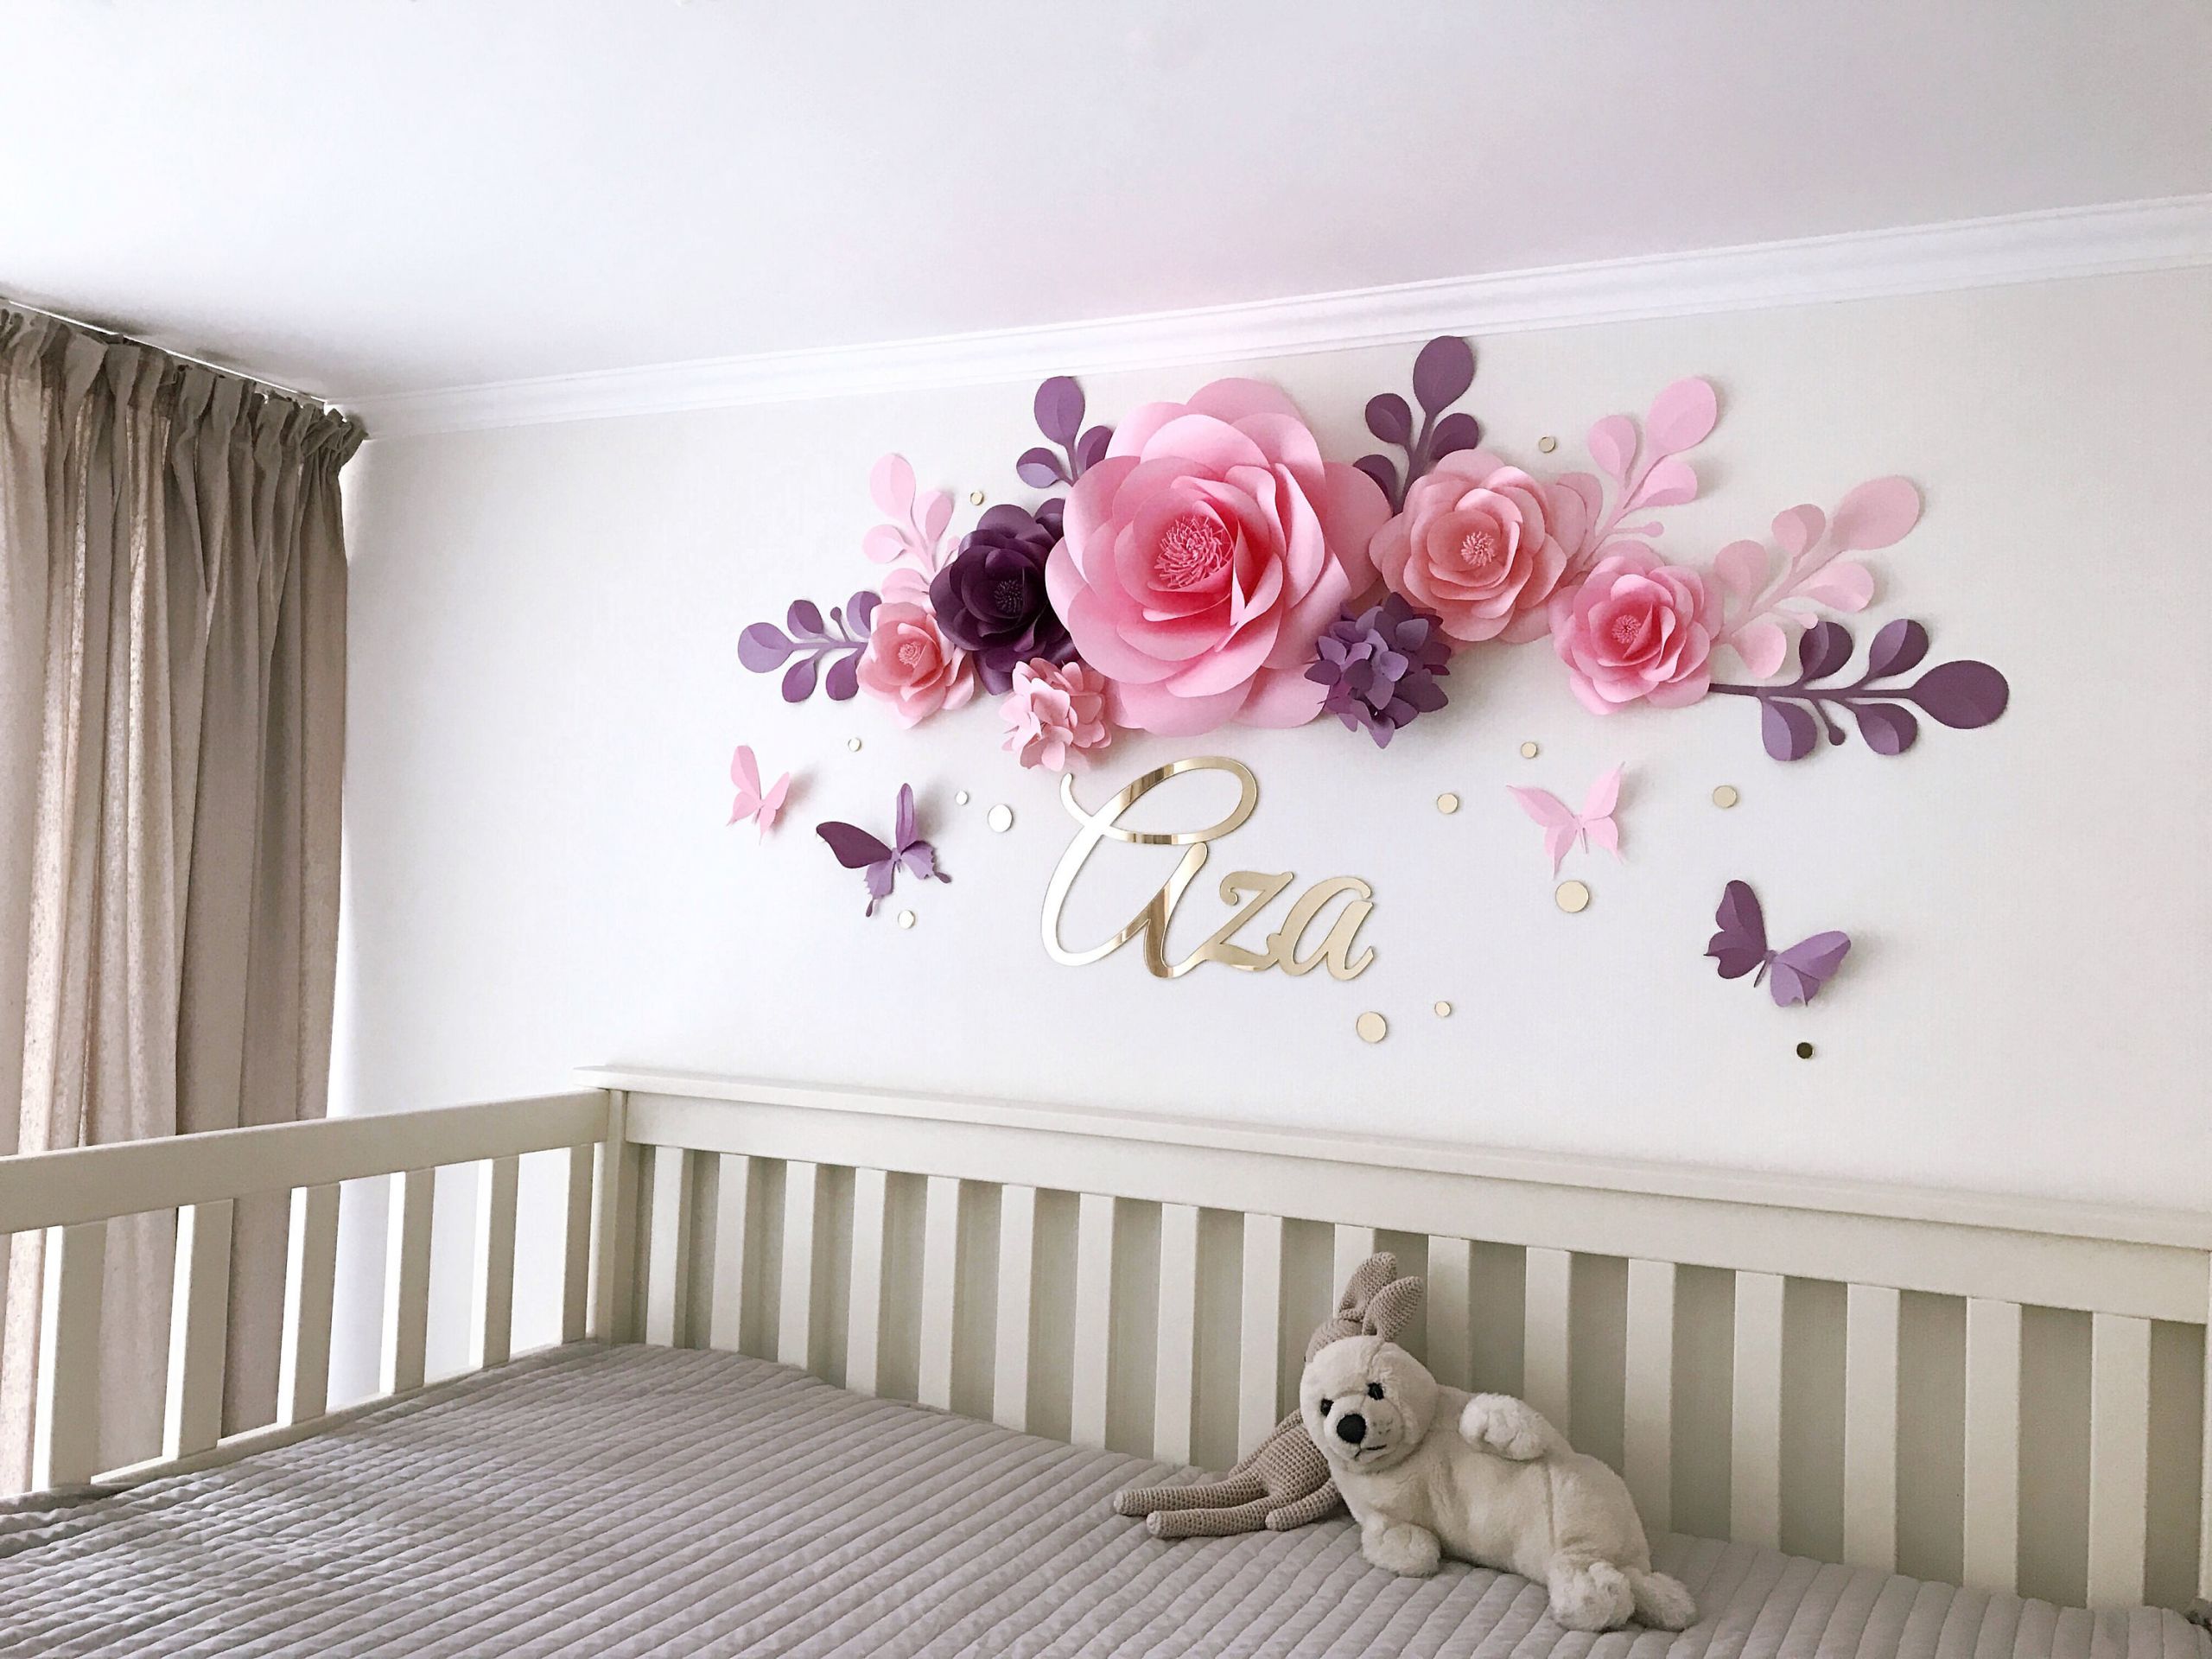 Baby Girl Room Decoration
 Nursery Paper Flowers Paper flowers over the crib Baby